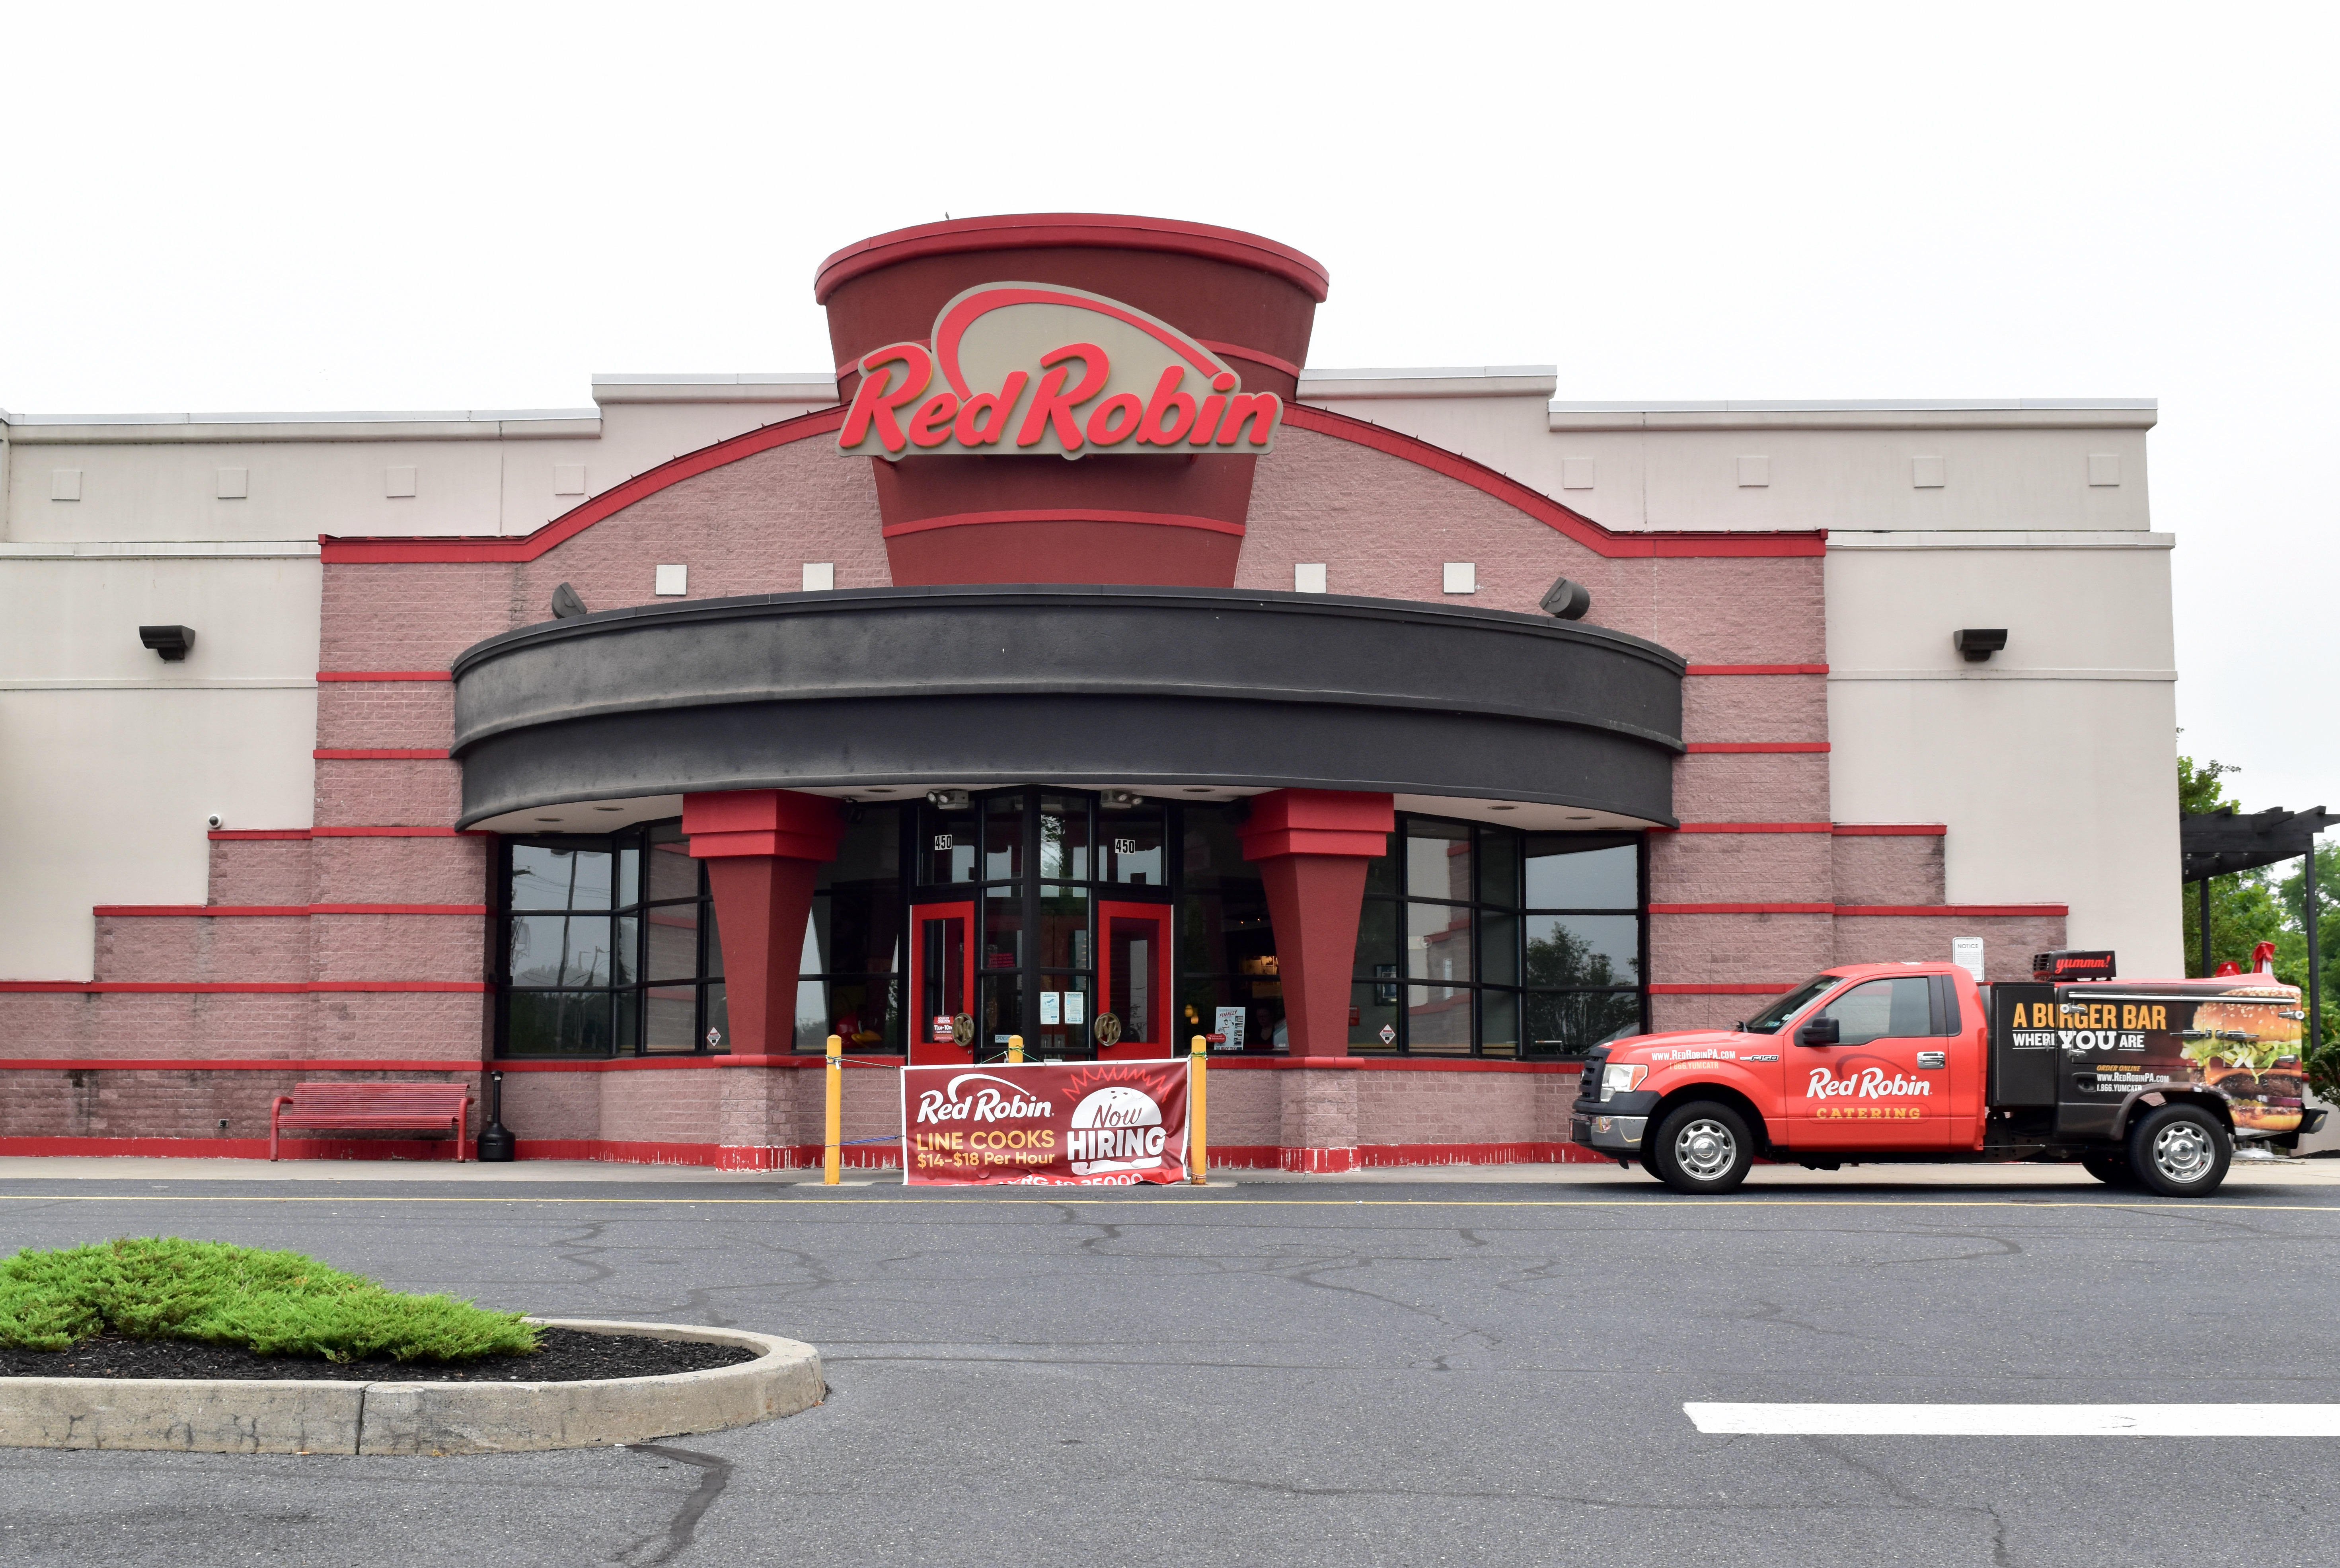 Exterior of the Silver Springs Red Robin in Mechanicsburg, PA